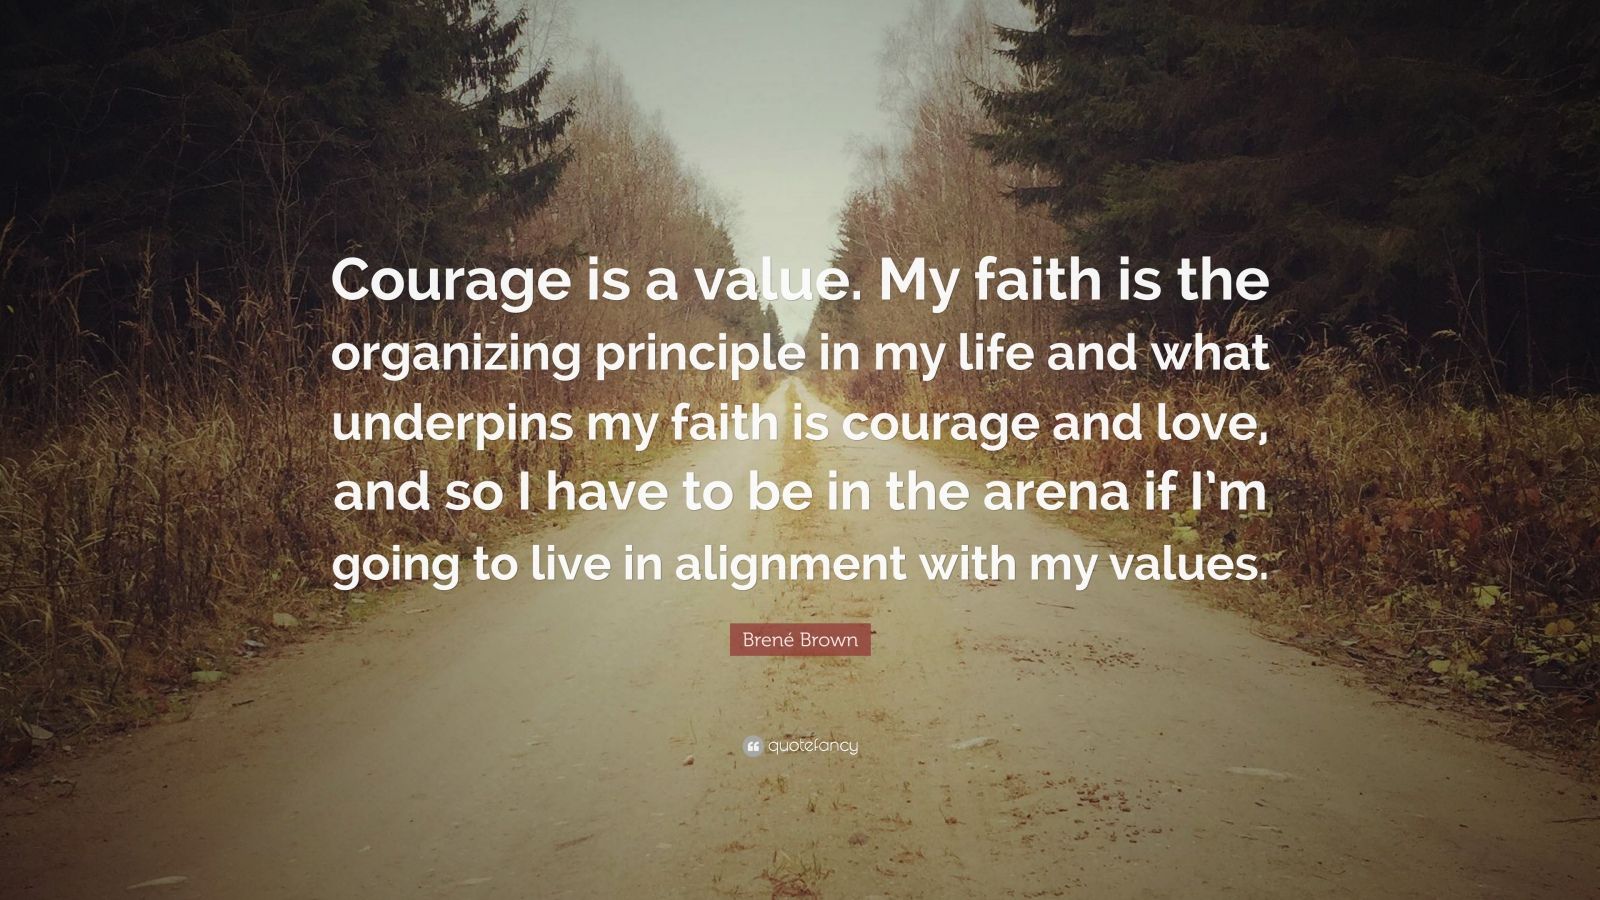 Brené Brown Quote: “Courage is a value. My faith is the organizing ...